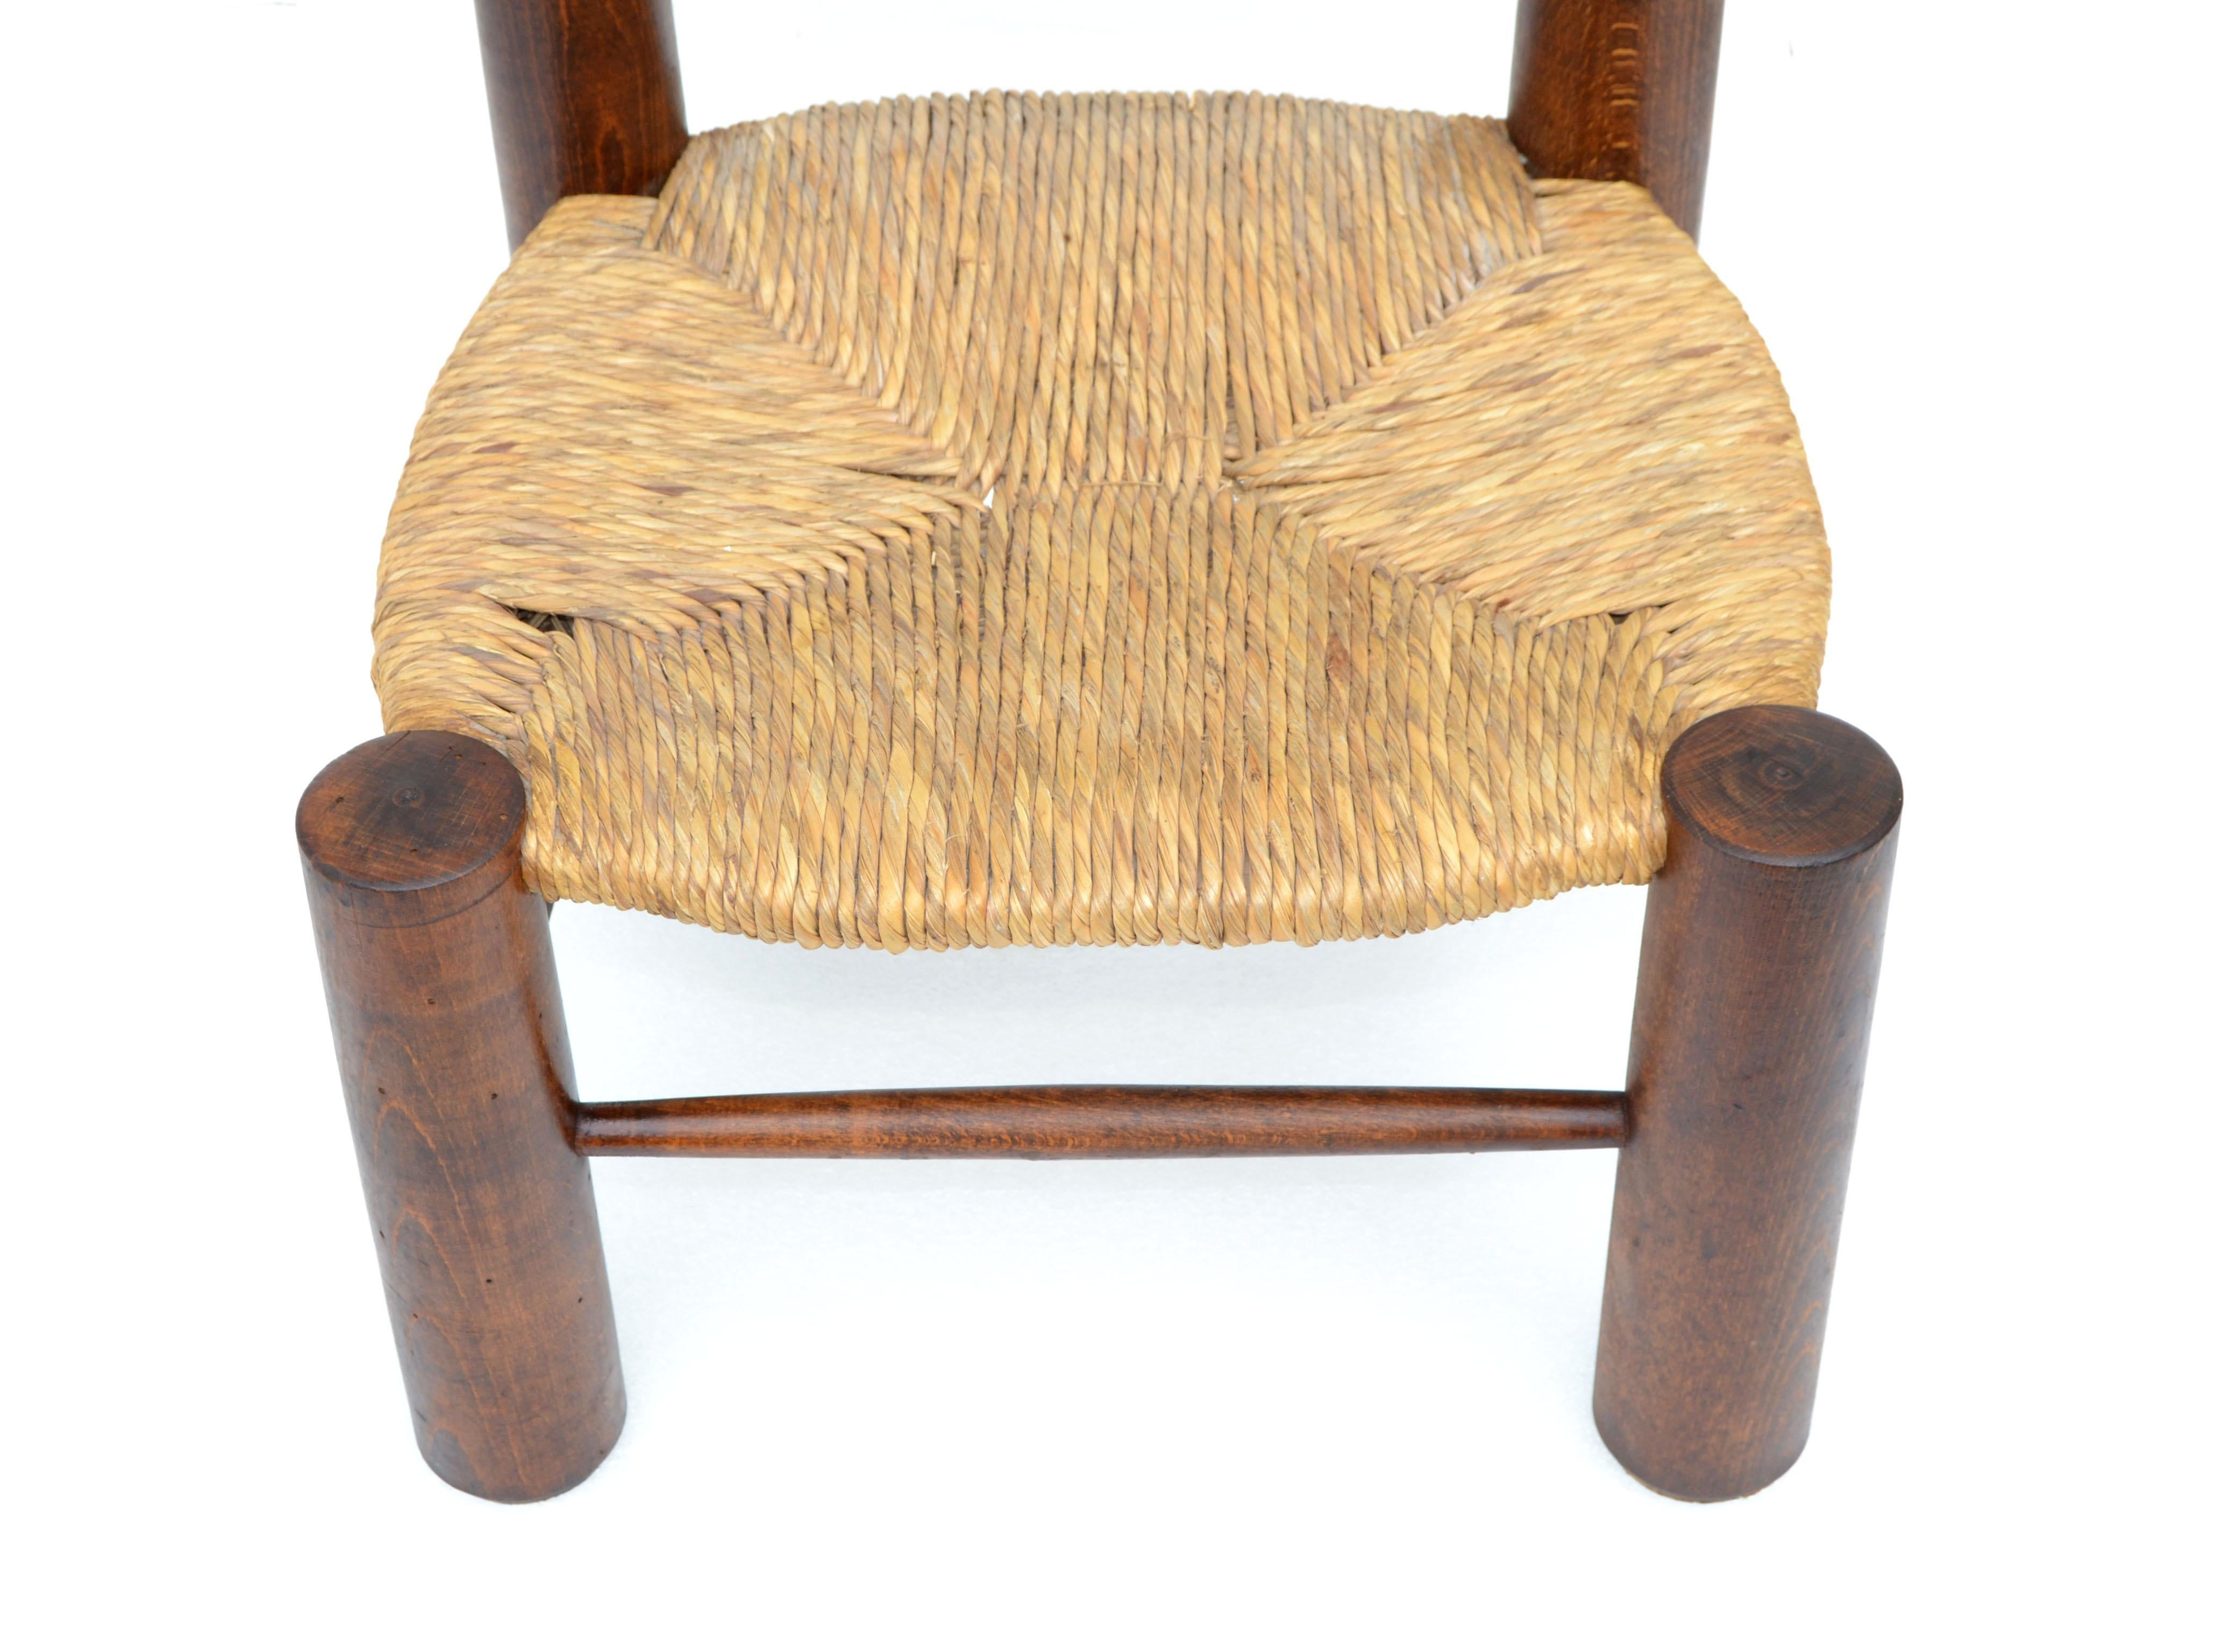 French Charlotte Perriand Style Turned Wood Kid's Chair Woven Rush Seat France 1960 For Sale